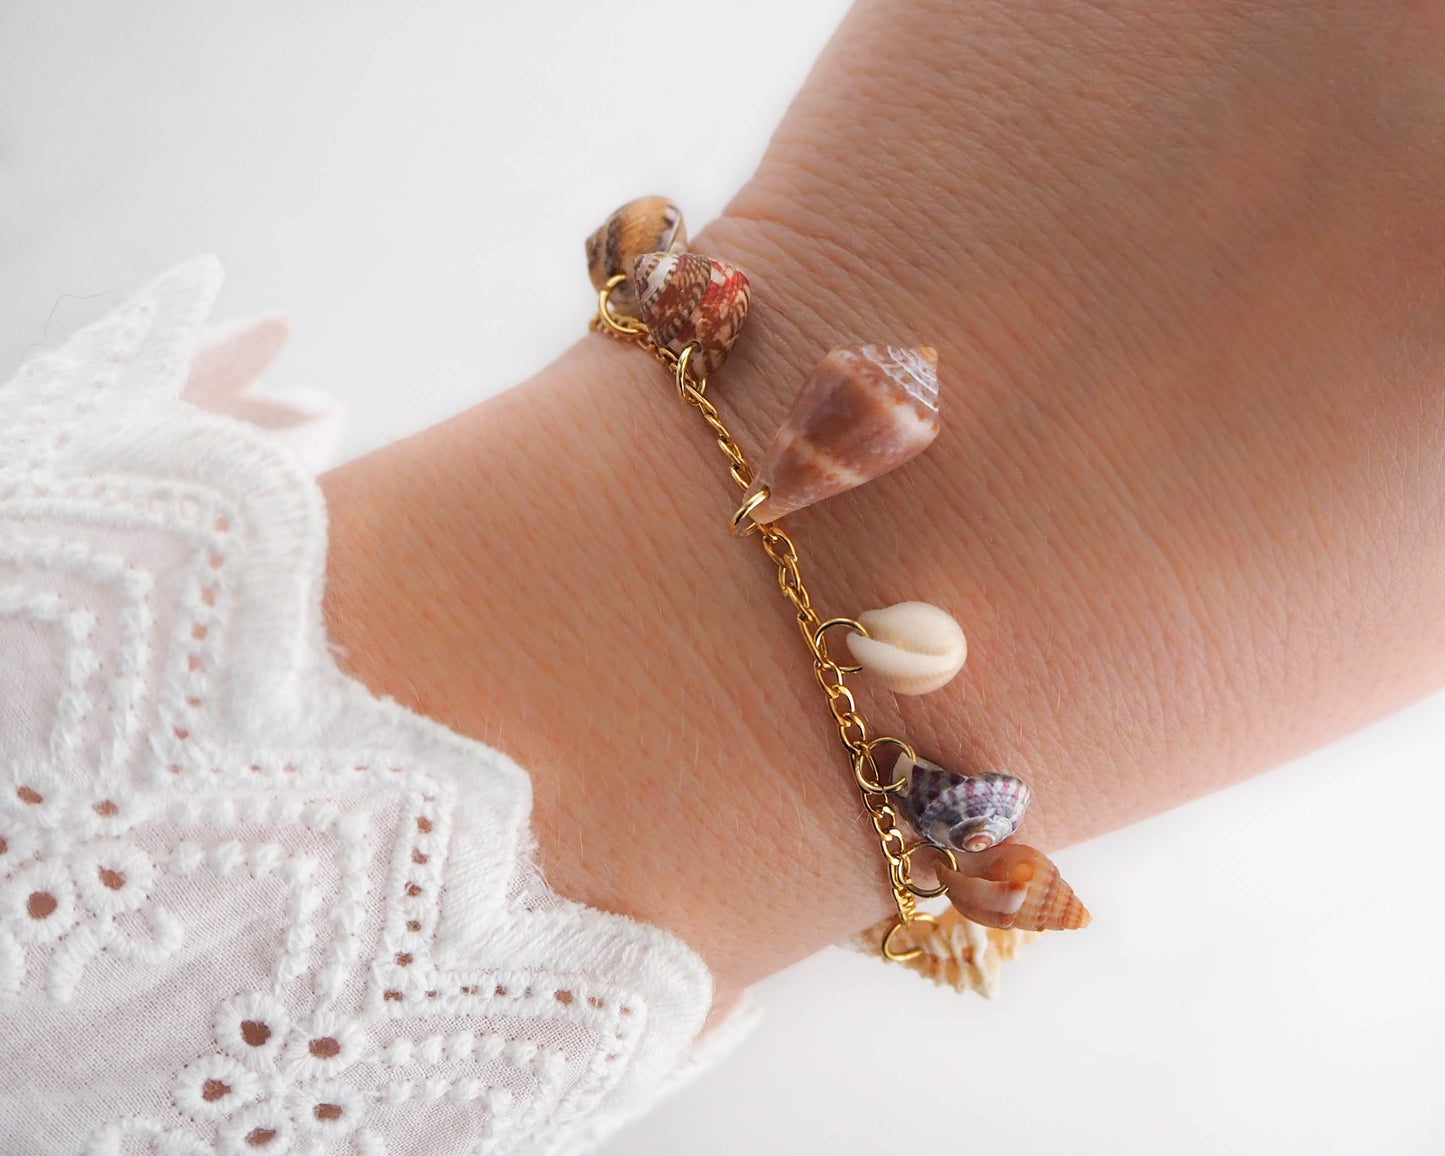 Model wearing Gold Shell Charm Bracelet with 7 Tiny Shells: ocean-inspired jewelry from Portugal